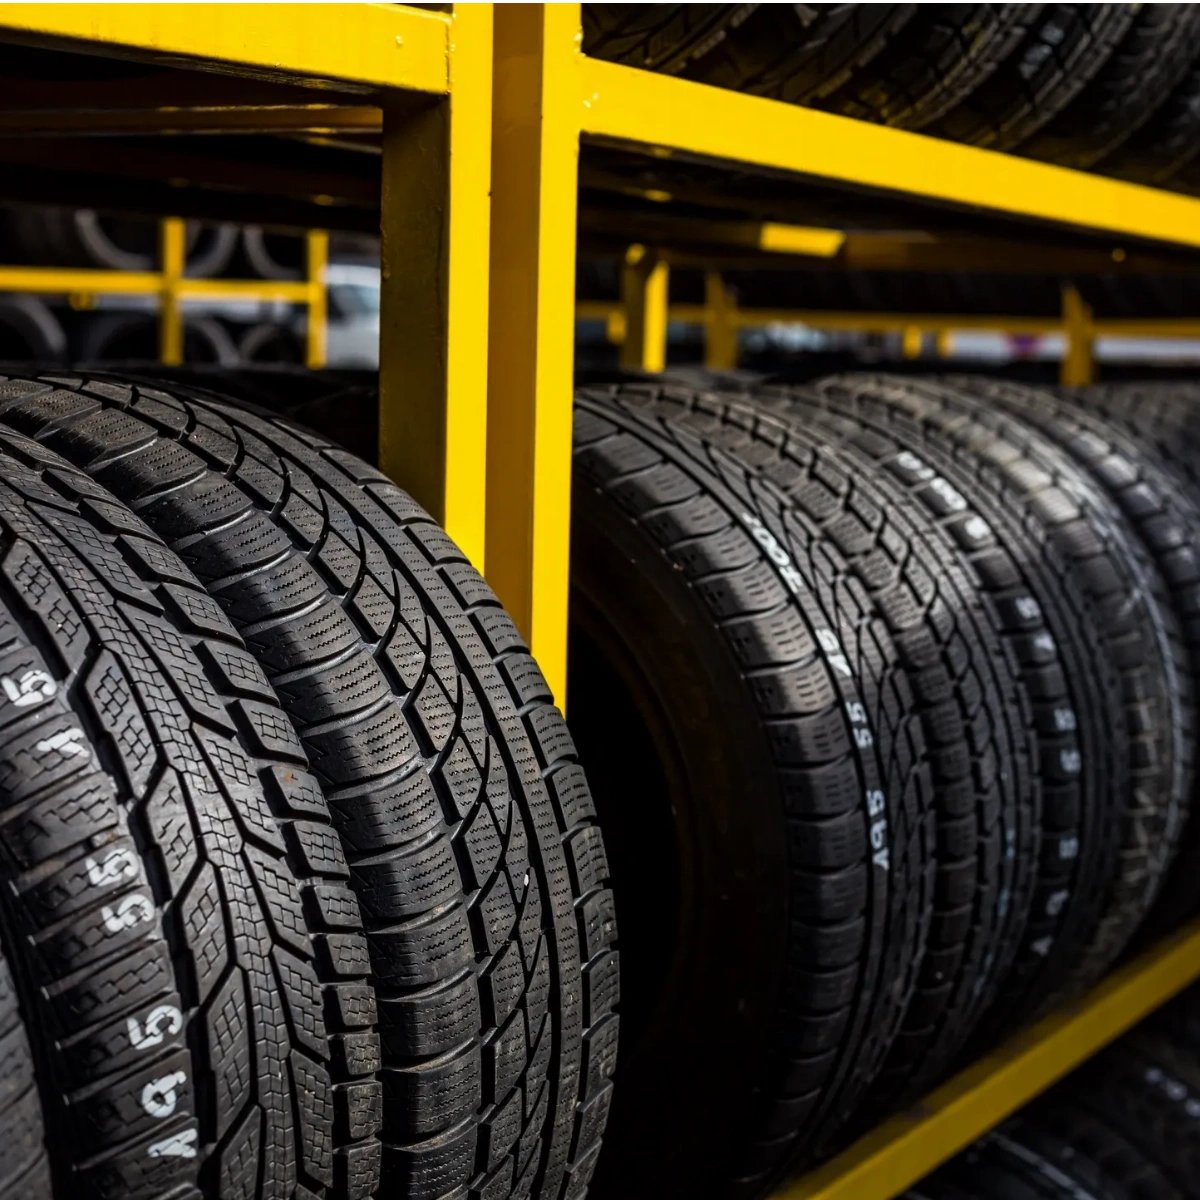 Looking for new tires or a pre-owned vehicle? Look no further! Our expert team is here to help you out. 

#GocheesGarage #AutoRepair #CarRepair #EngineRepair #ASECertified #Tires #GoodyearTires #Delmarny